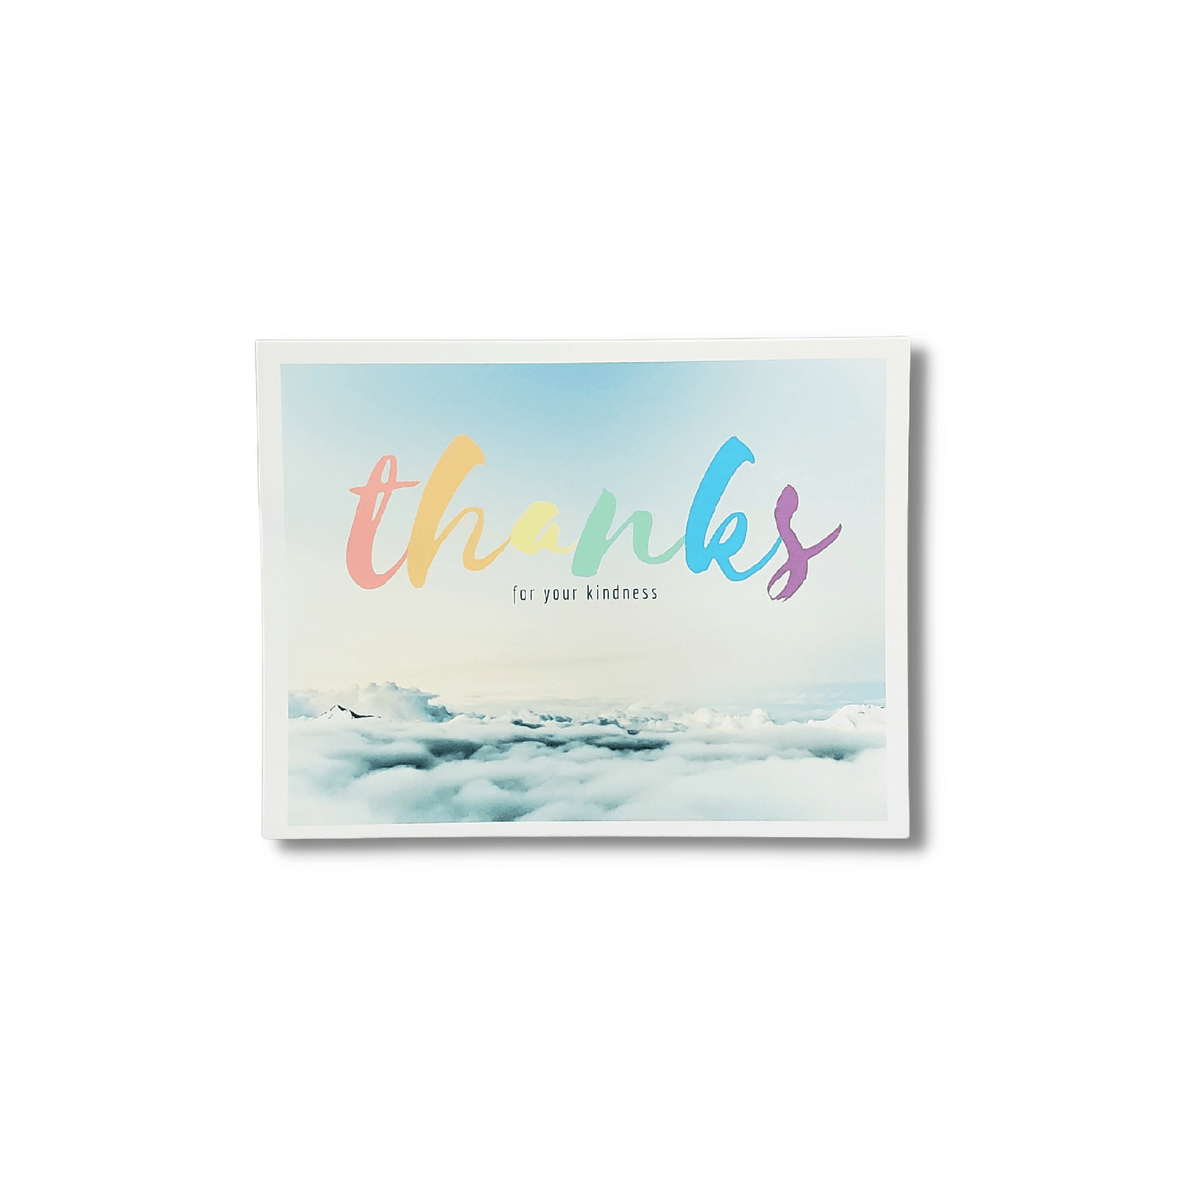 Thank You Card for Someones Kindess. Kindness